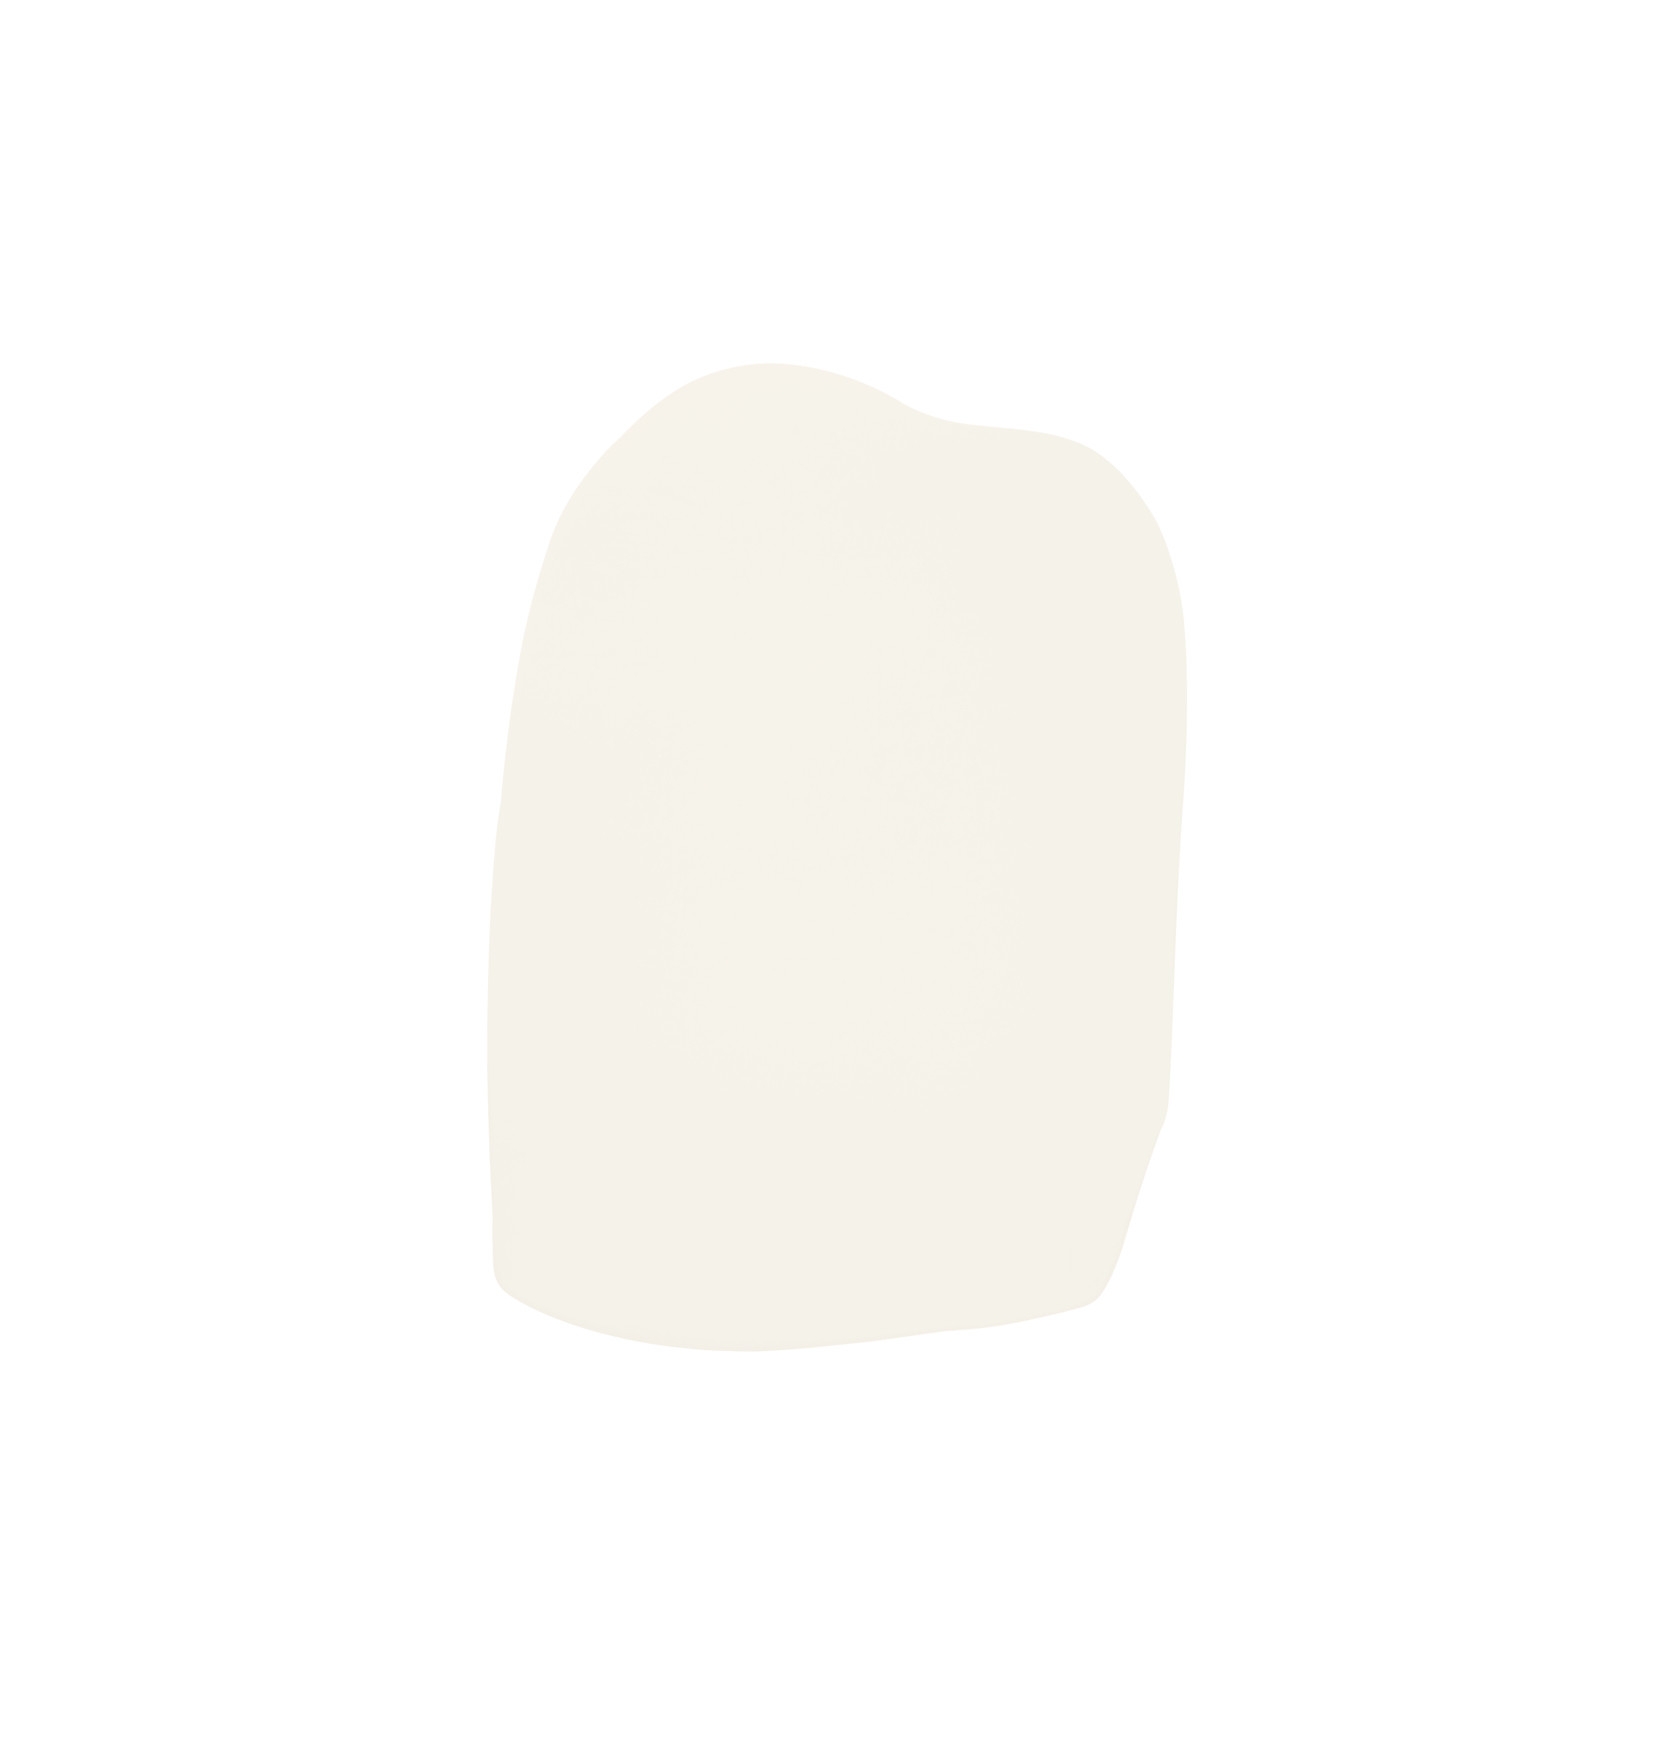 Clare Paint, Timeless, Wall Paint Eggshell, Gallon - Image 1